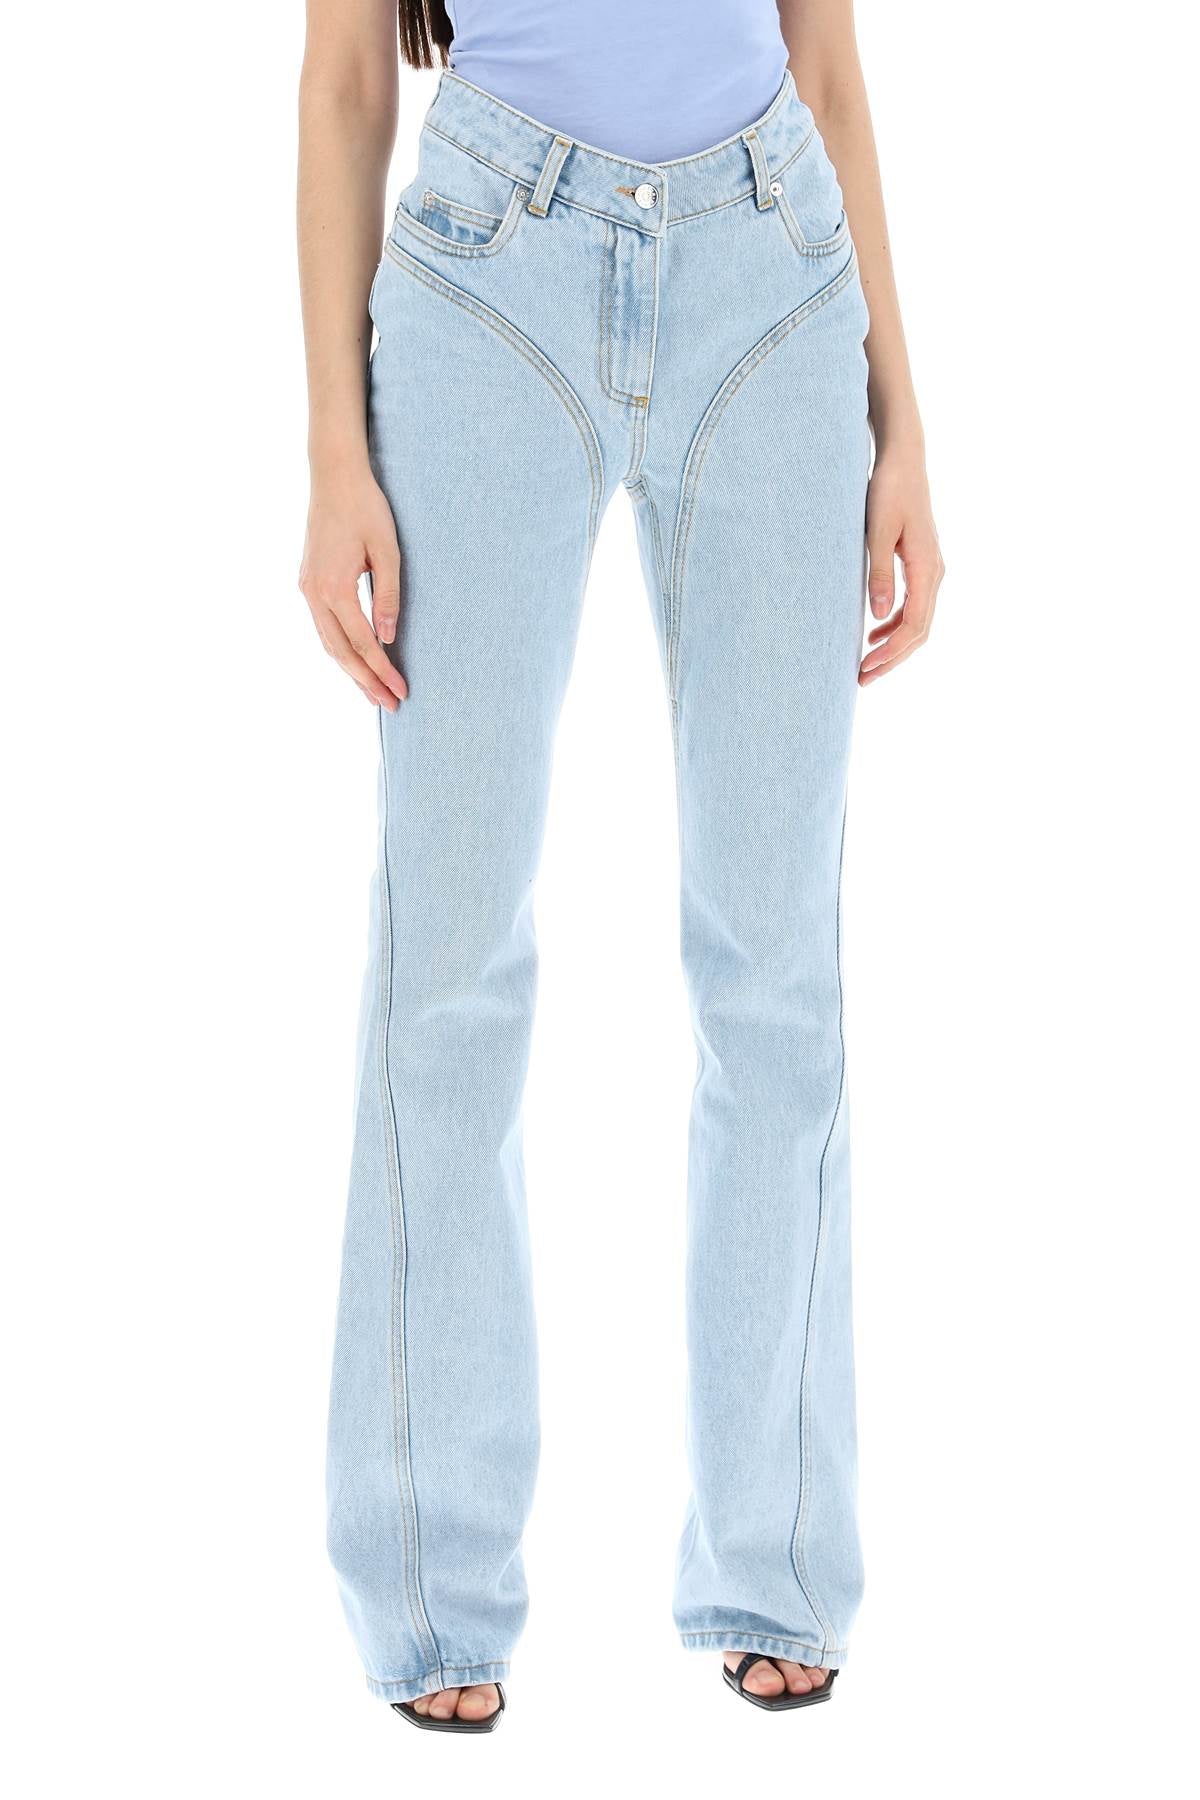 MUGLER Fitted Flared Jeans with Iconic Contrast Stitching